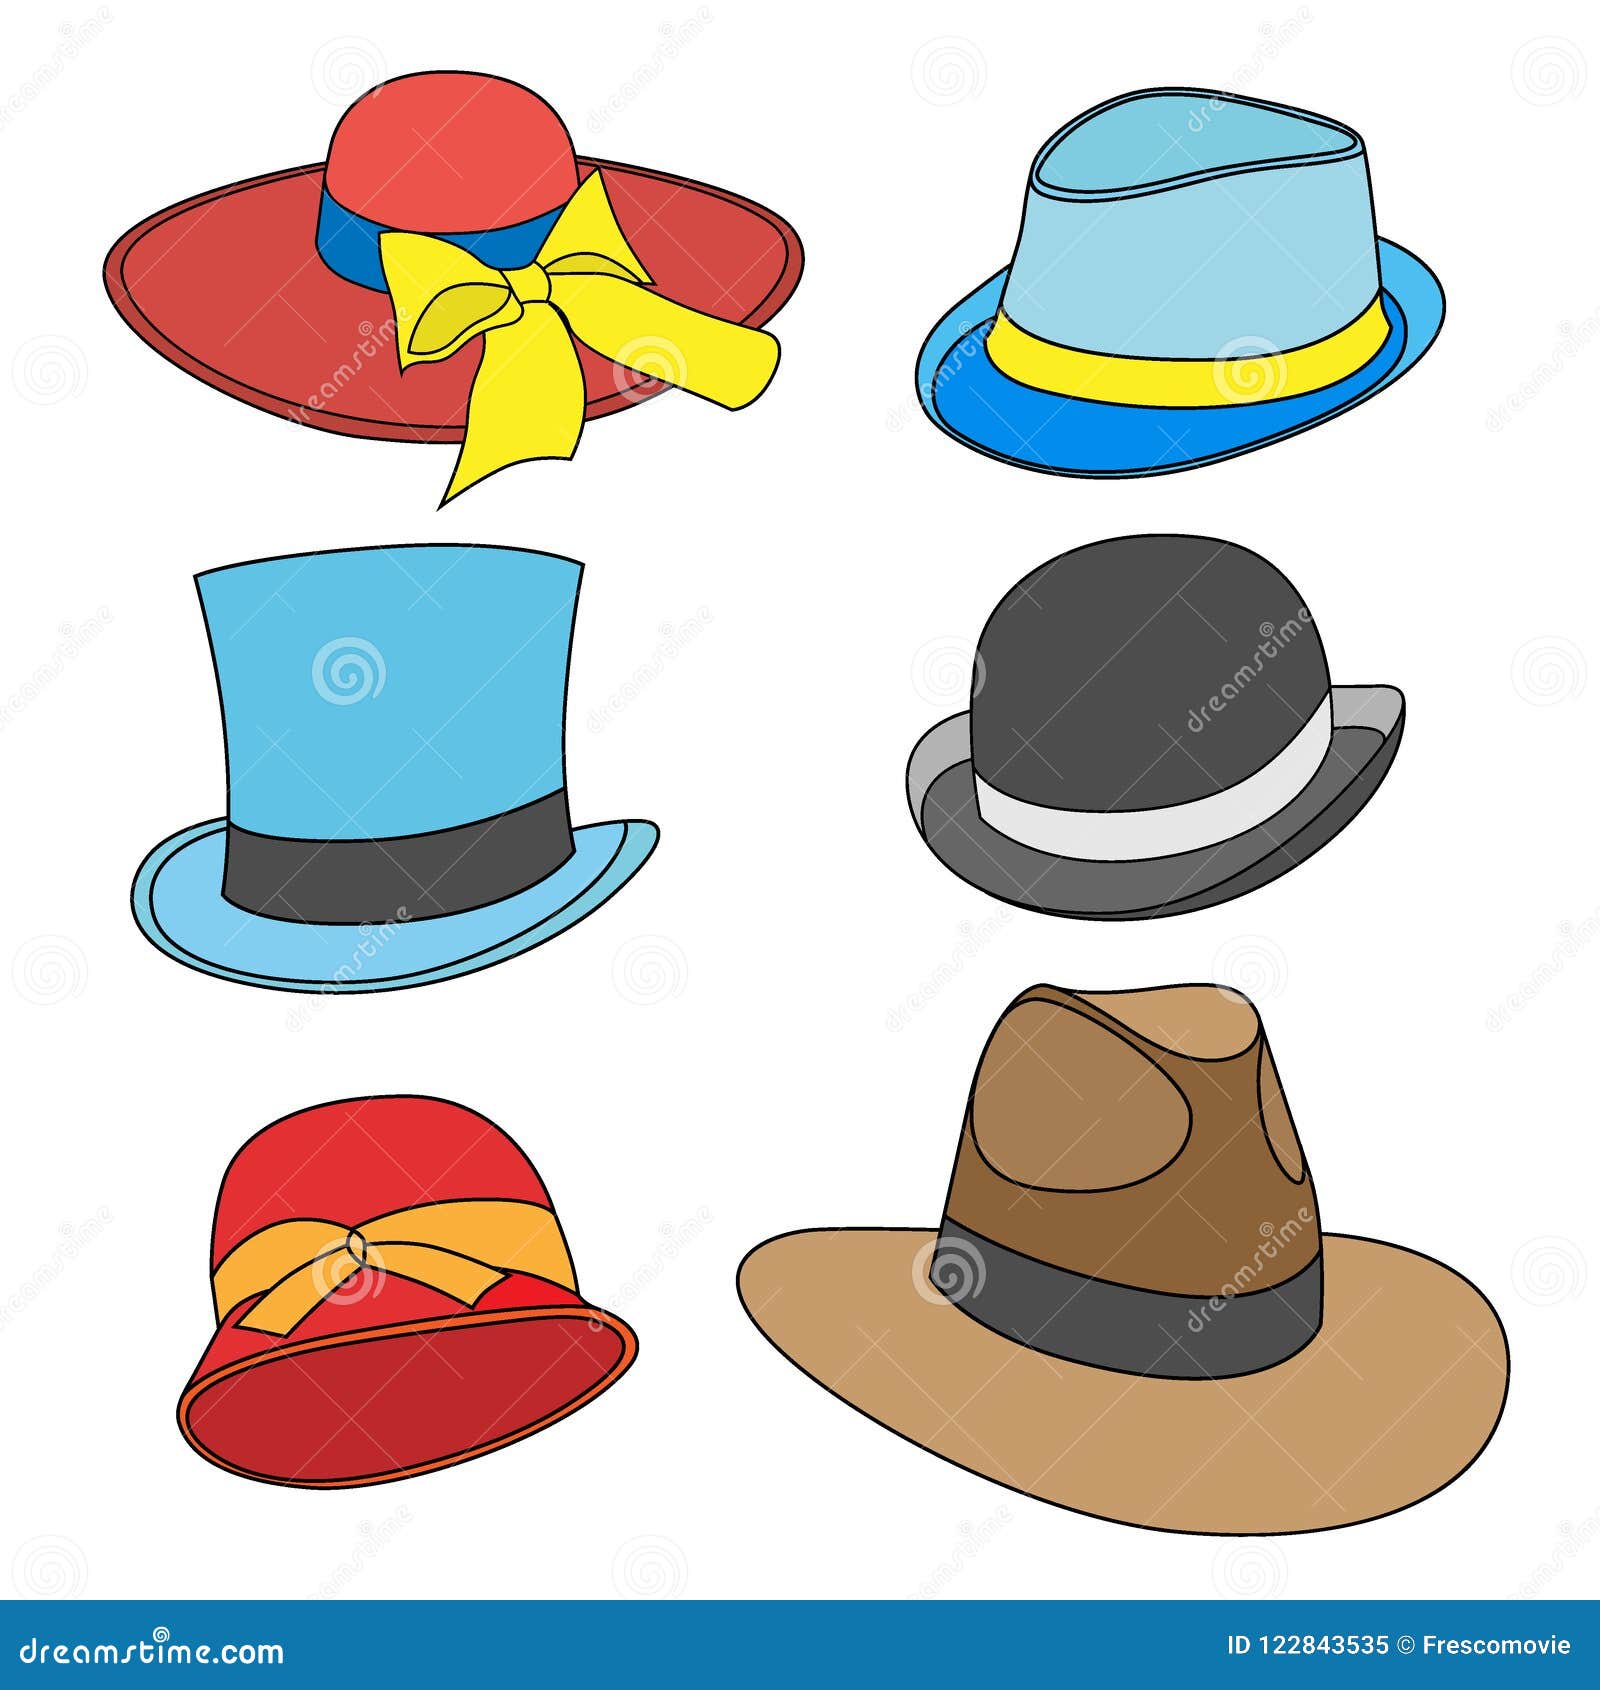 Male and female hats stock vector. Illustration of collection - 122843535